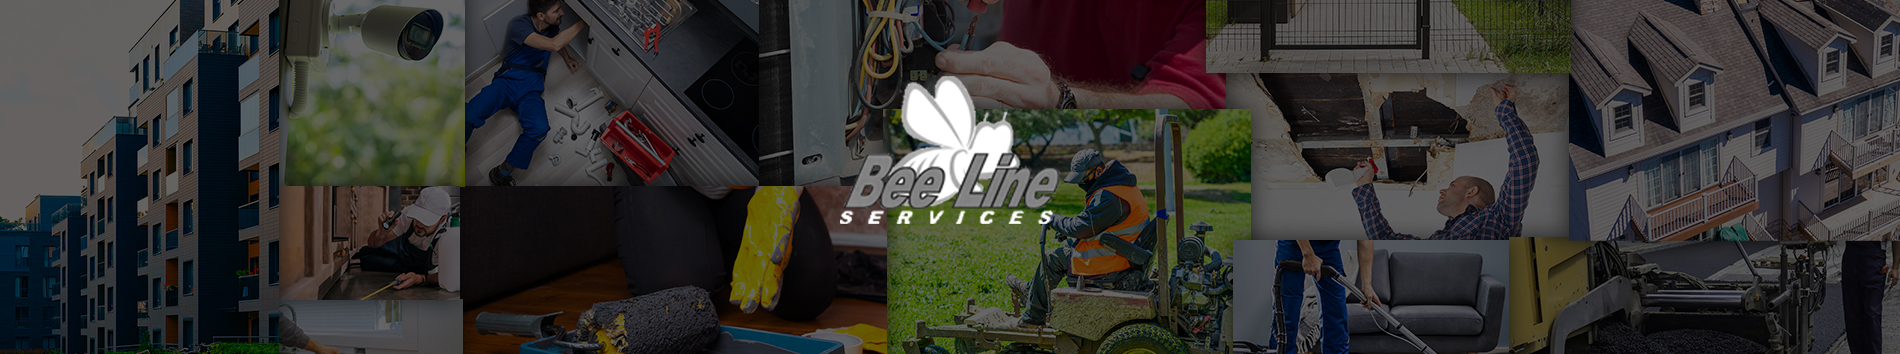 Bee Line Services